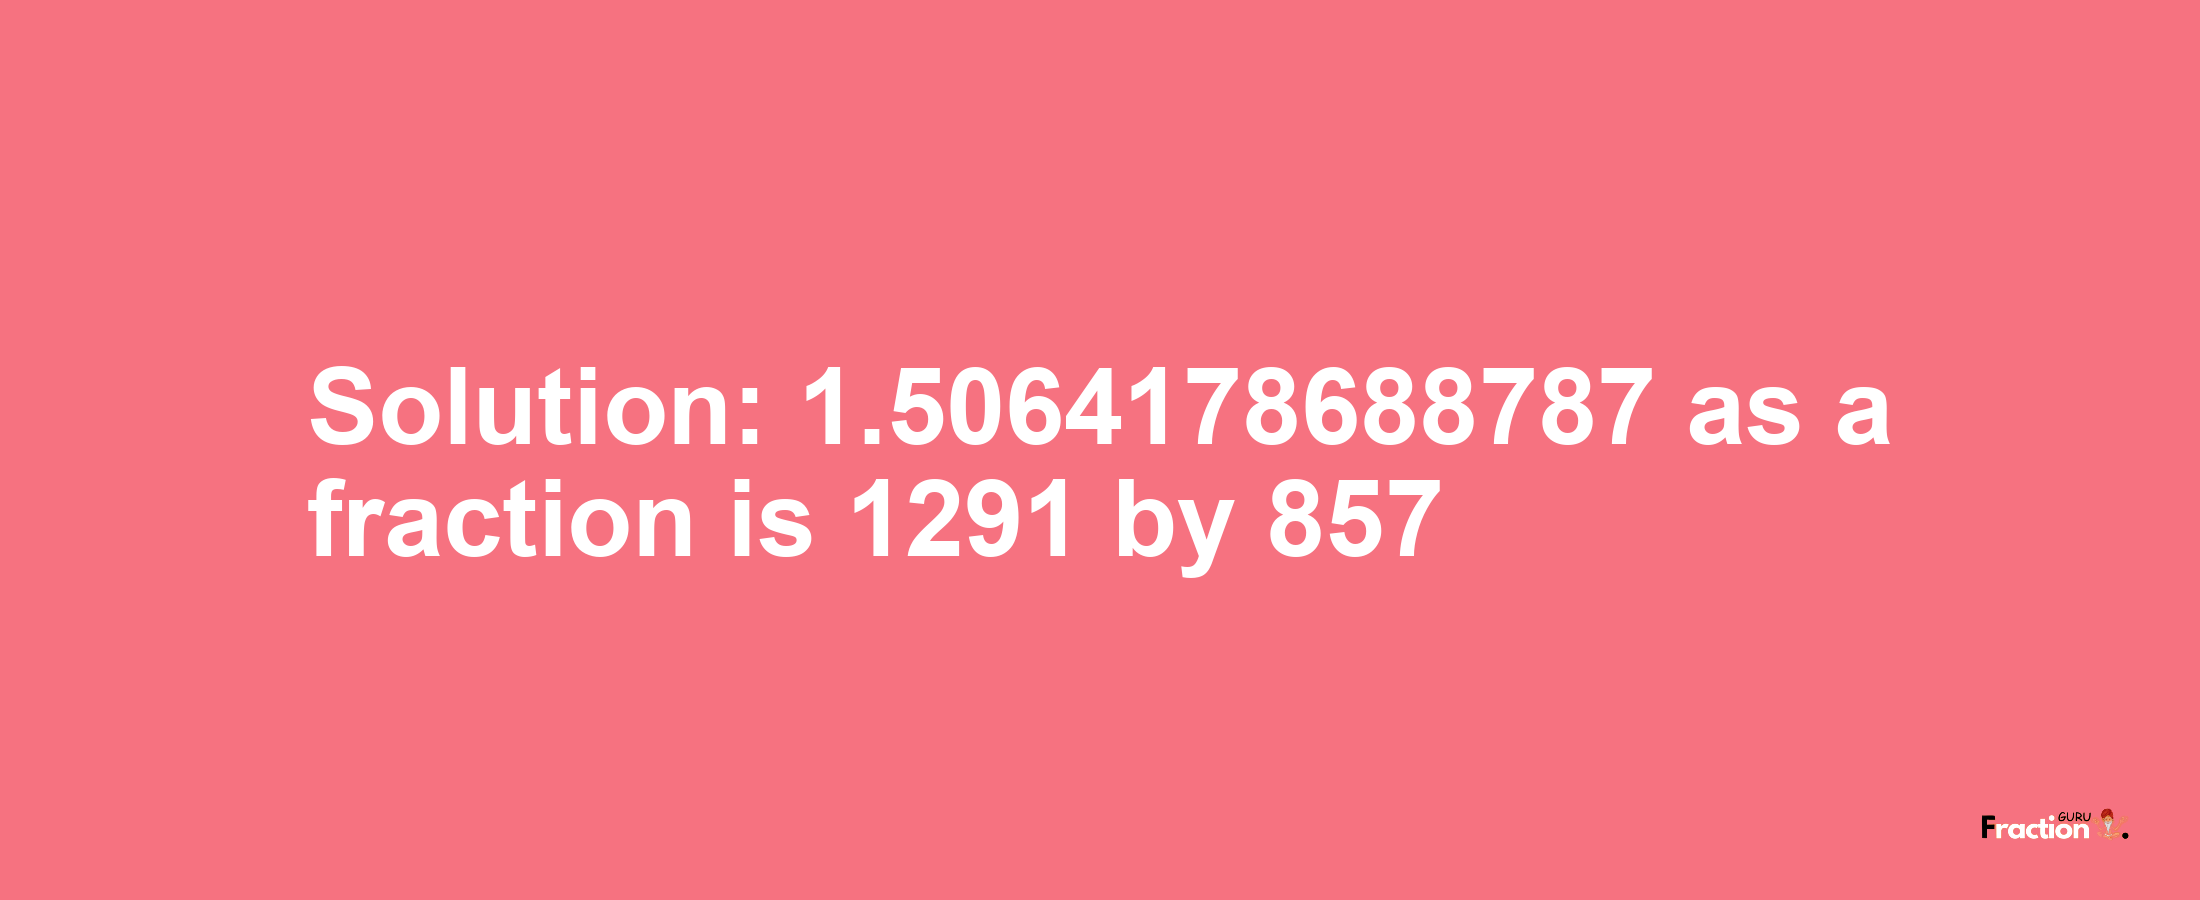 Solution:1.5064178688787 as a fraction is 1291/857